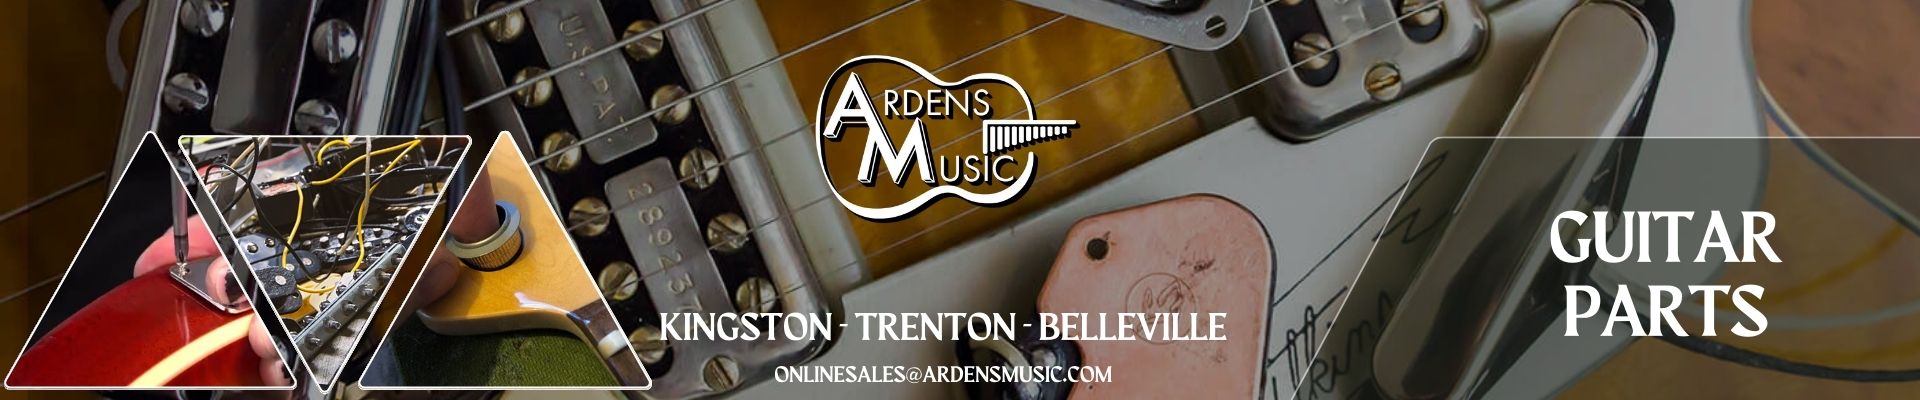 Arden's offers a wide range of replacement parts such as necks, pickups, pots, hardware, and more from brands like Fender, Seymour Duncan, TUSQ, Profile, and Gibson.